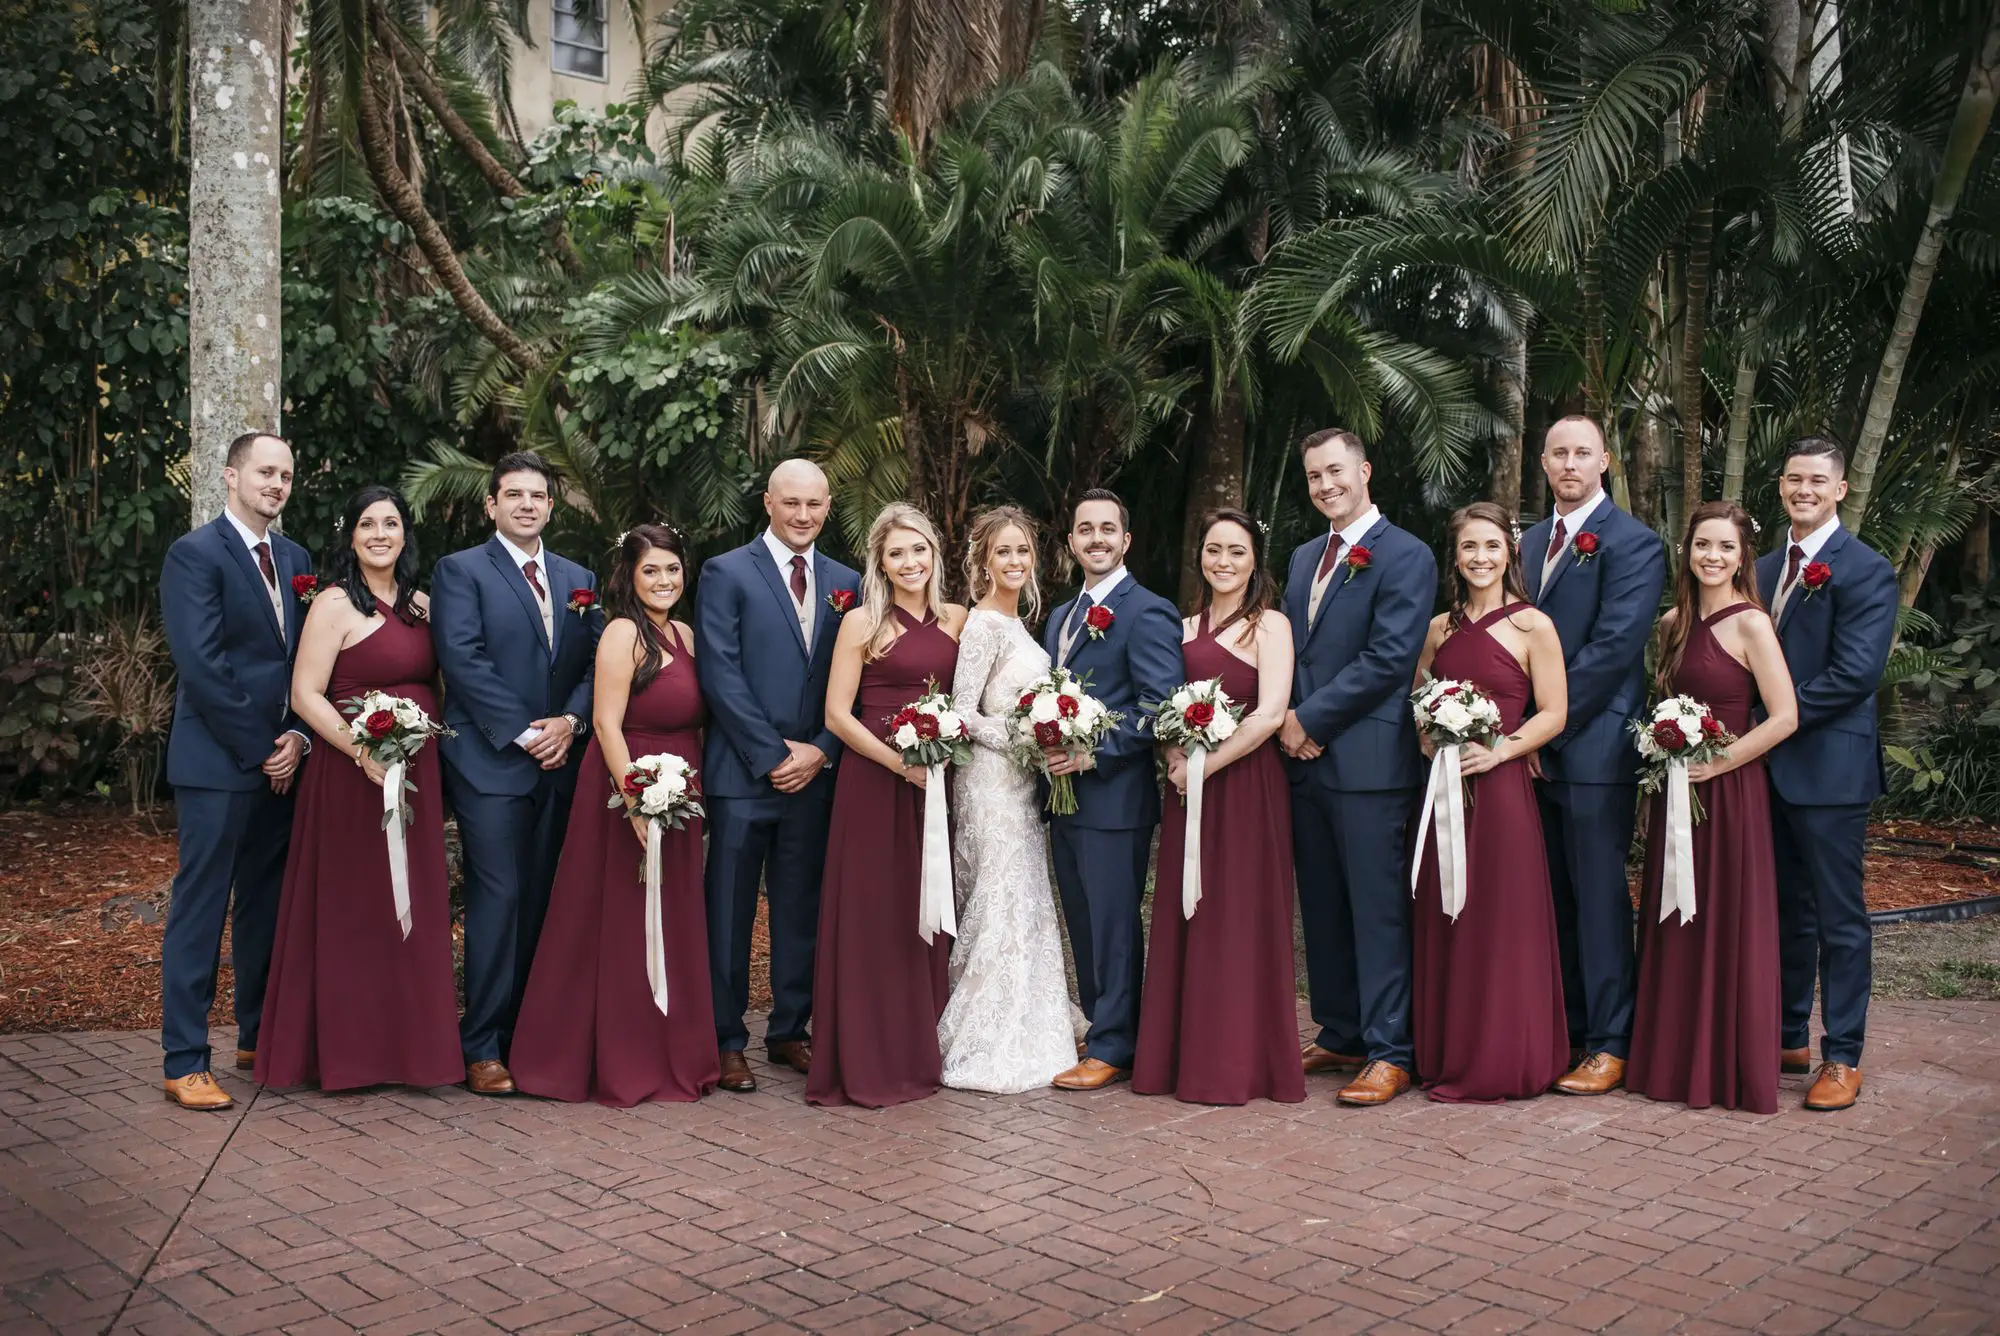 Burgundy and navy wedding party